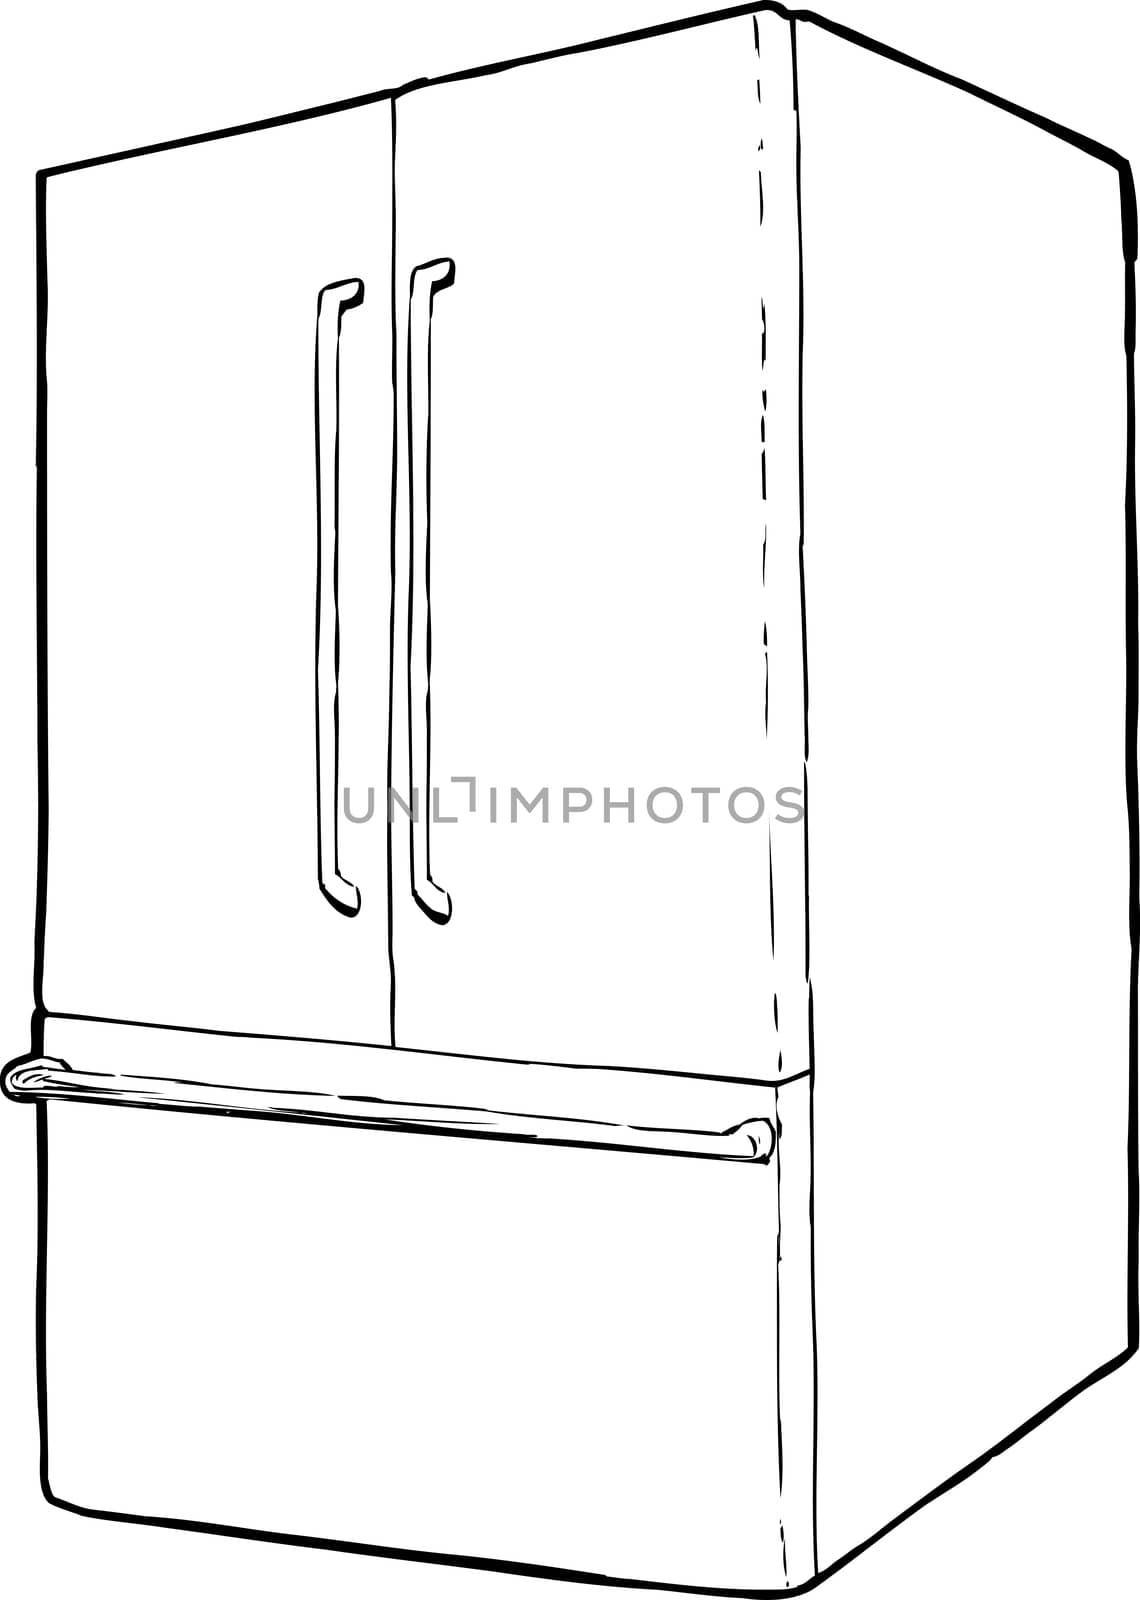 Outline of refrigerator with french doors and freezer drawer